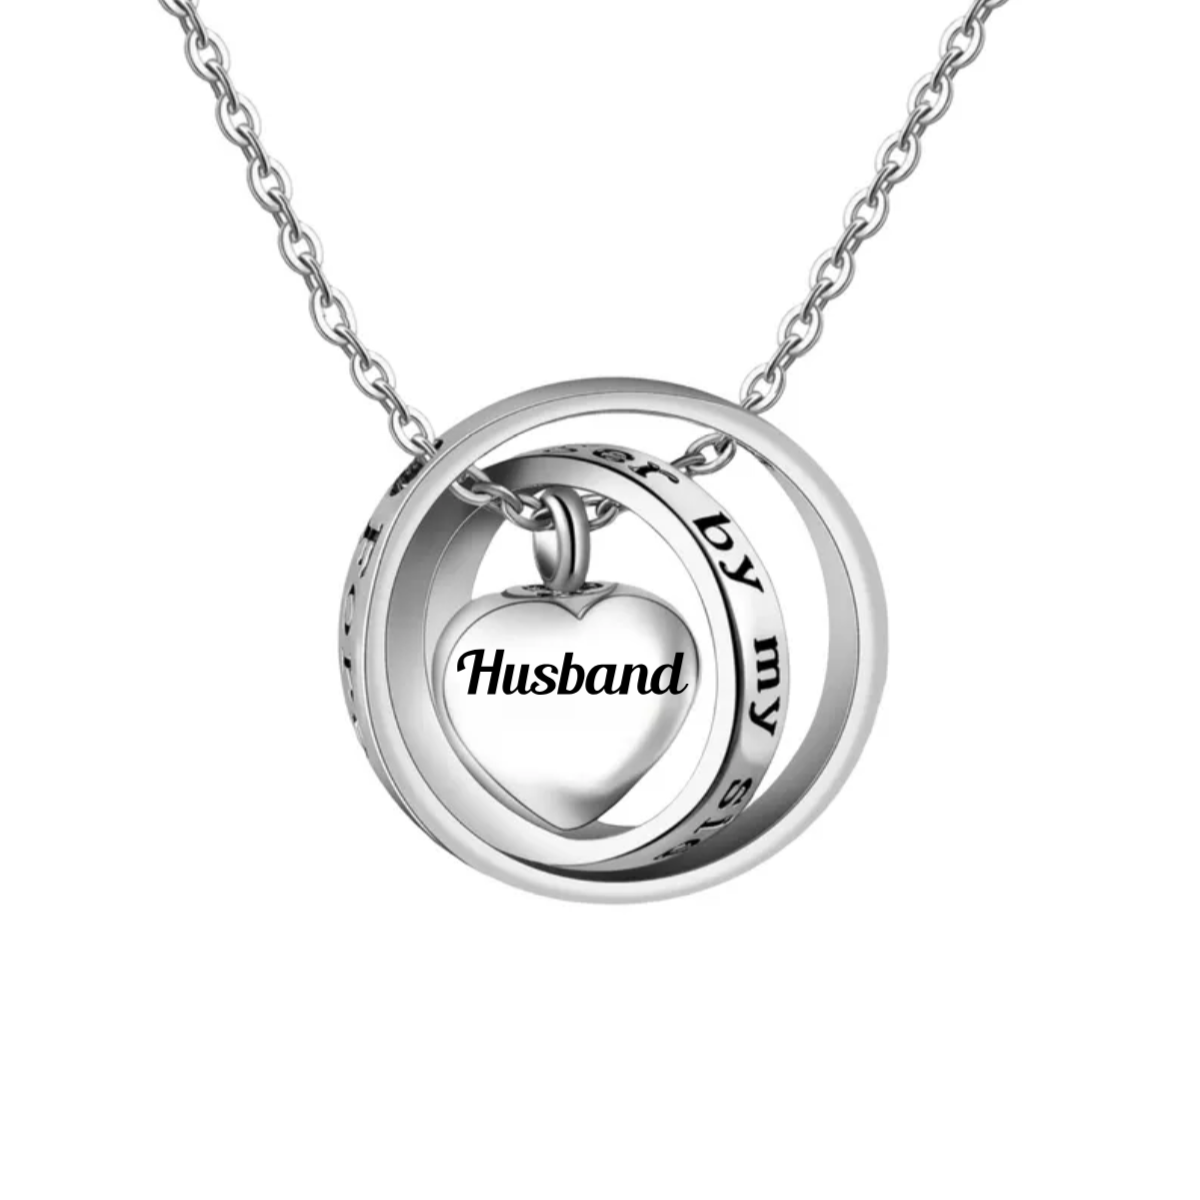 Personalized Engraved Name Urn Cremation Necklace for Woman